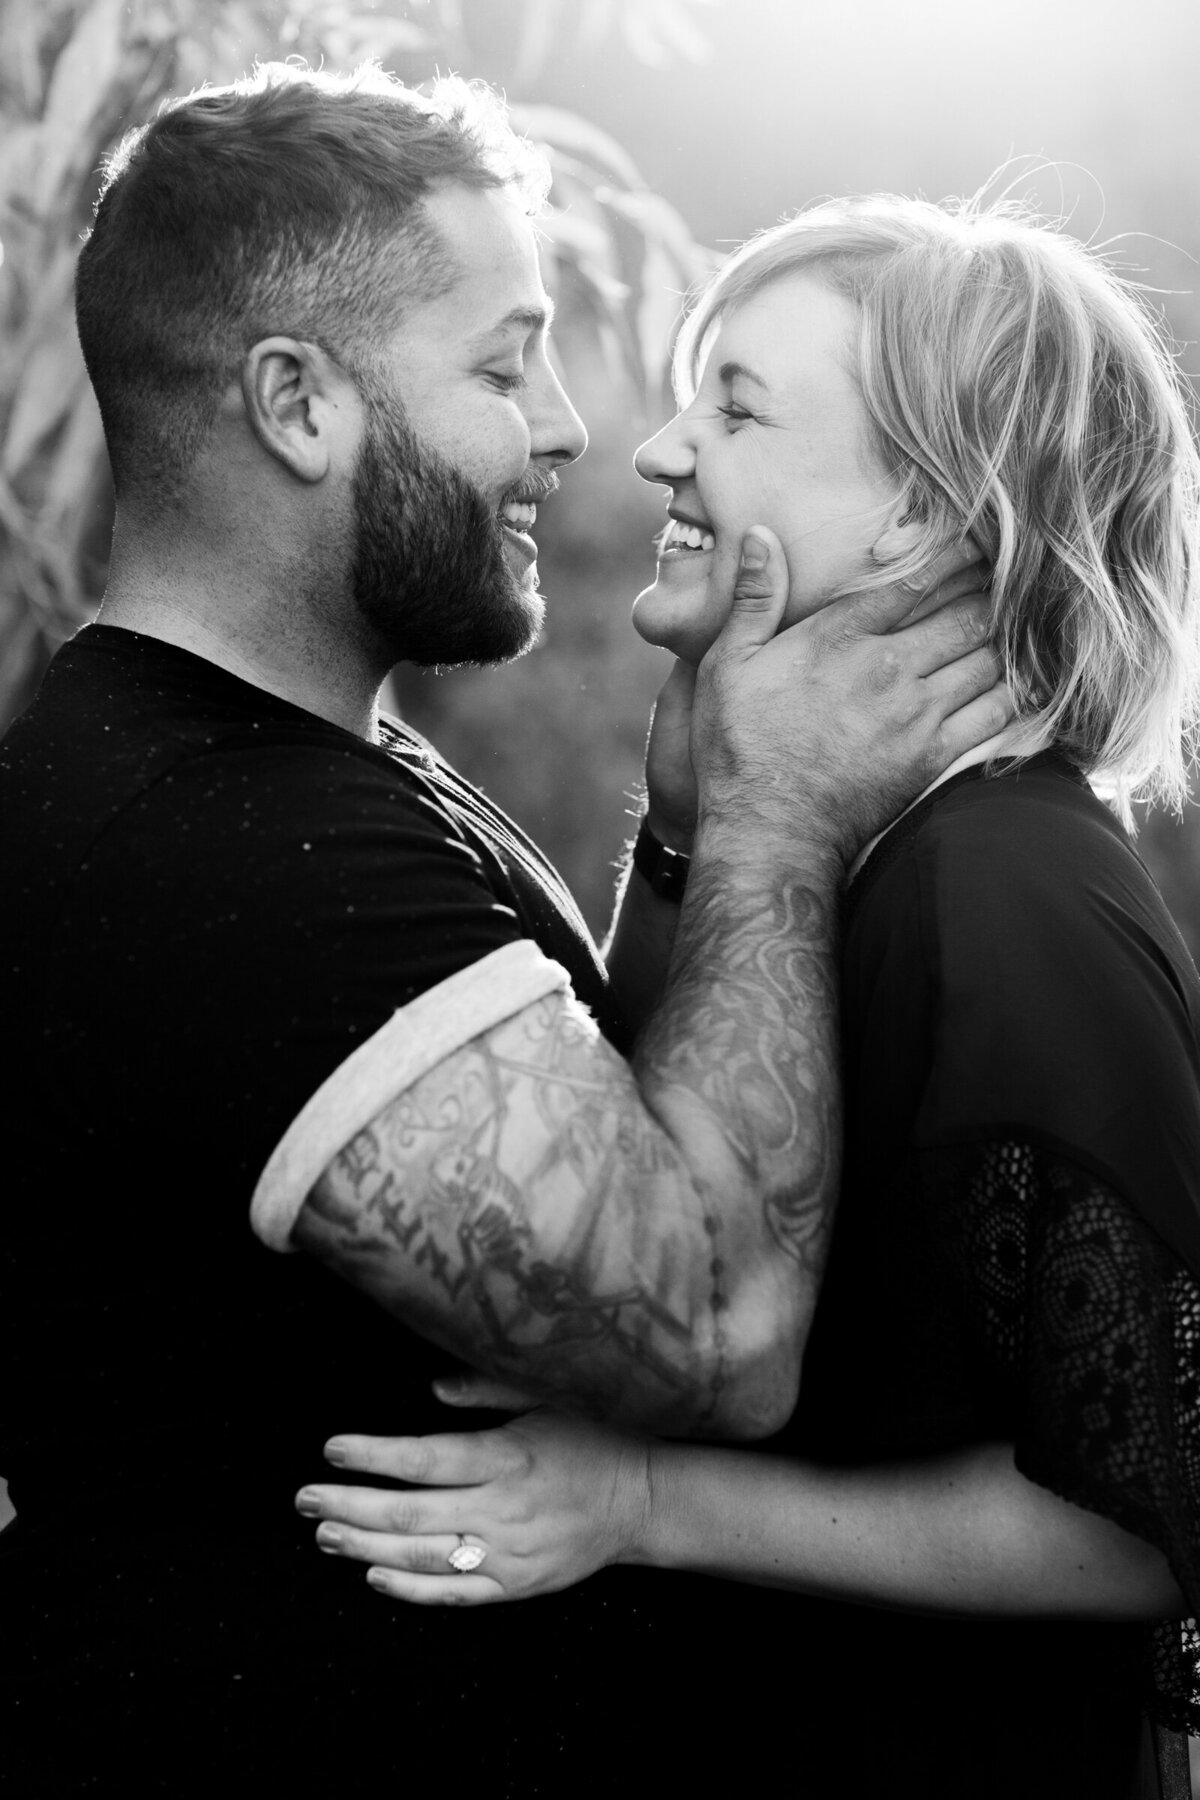 engaged couple posing together for engagement photo in black and white photo